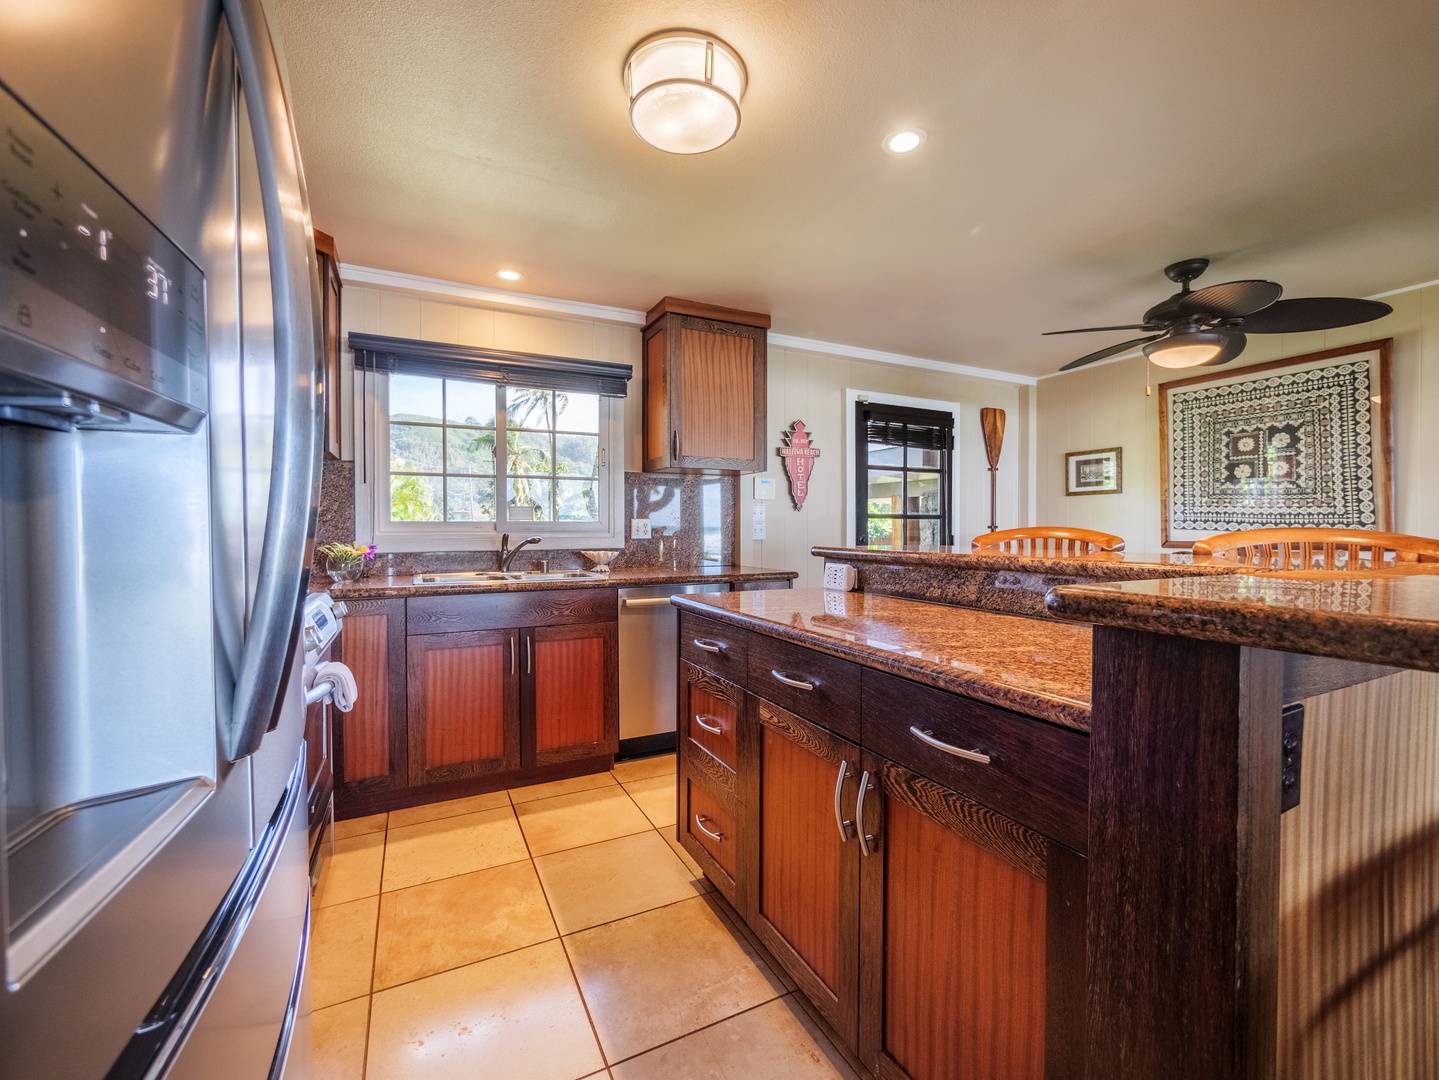 Haleiwa Vacation Rentals, Sunset Point Hawaiian Beachfront** - Rustic wooden cabinetry to store your kitchen essentials.